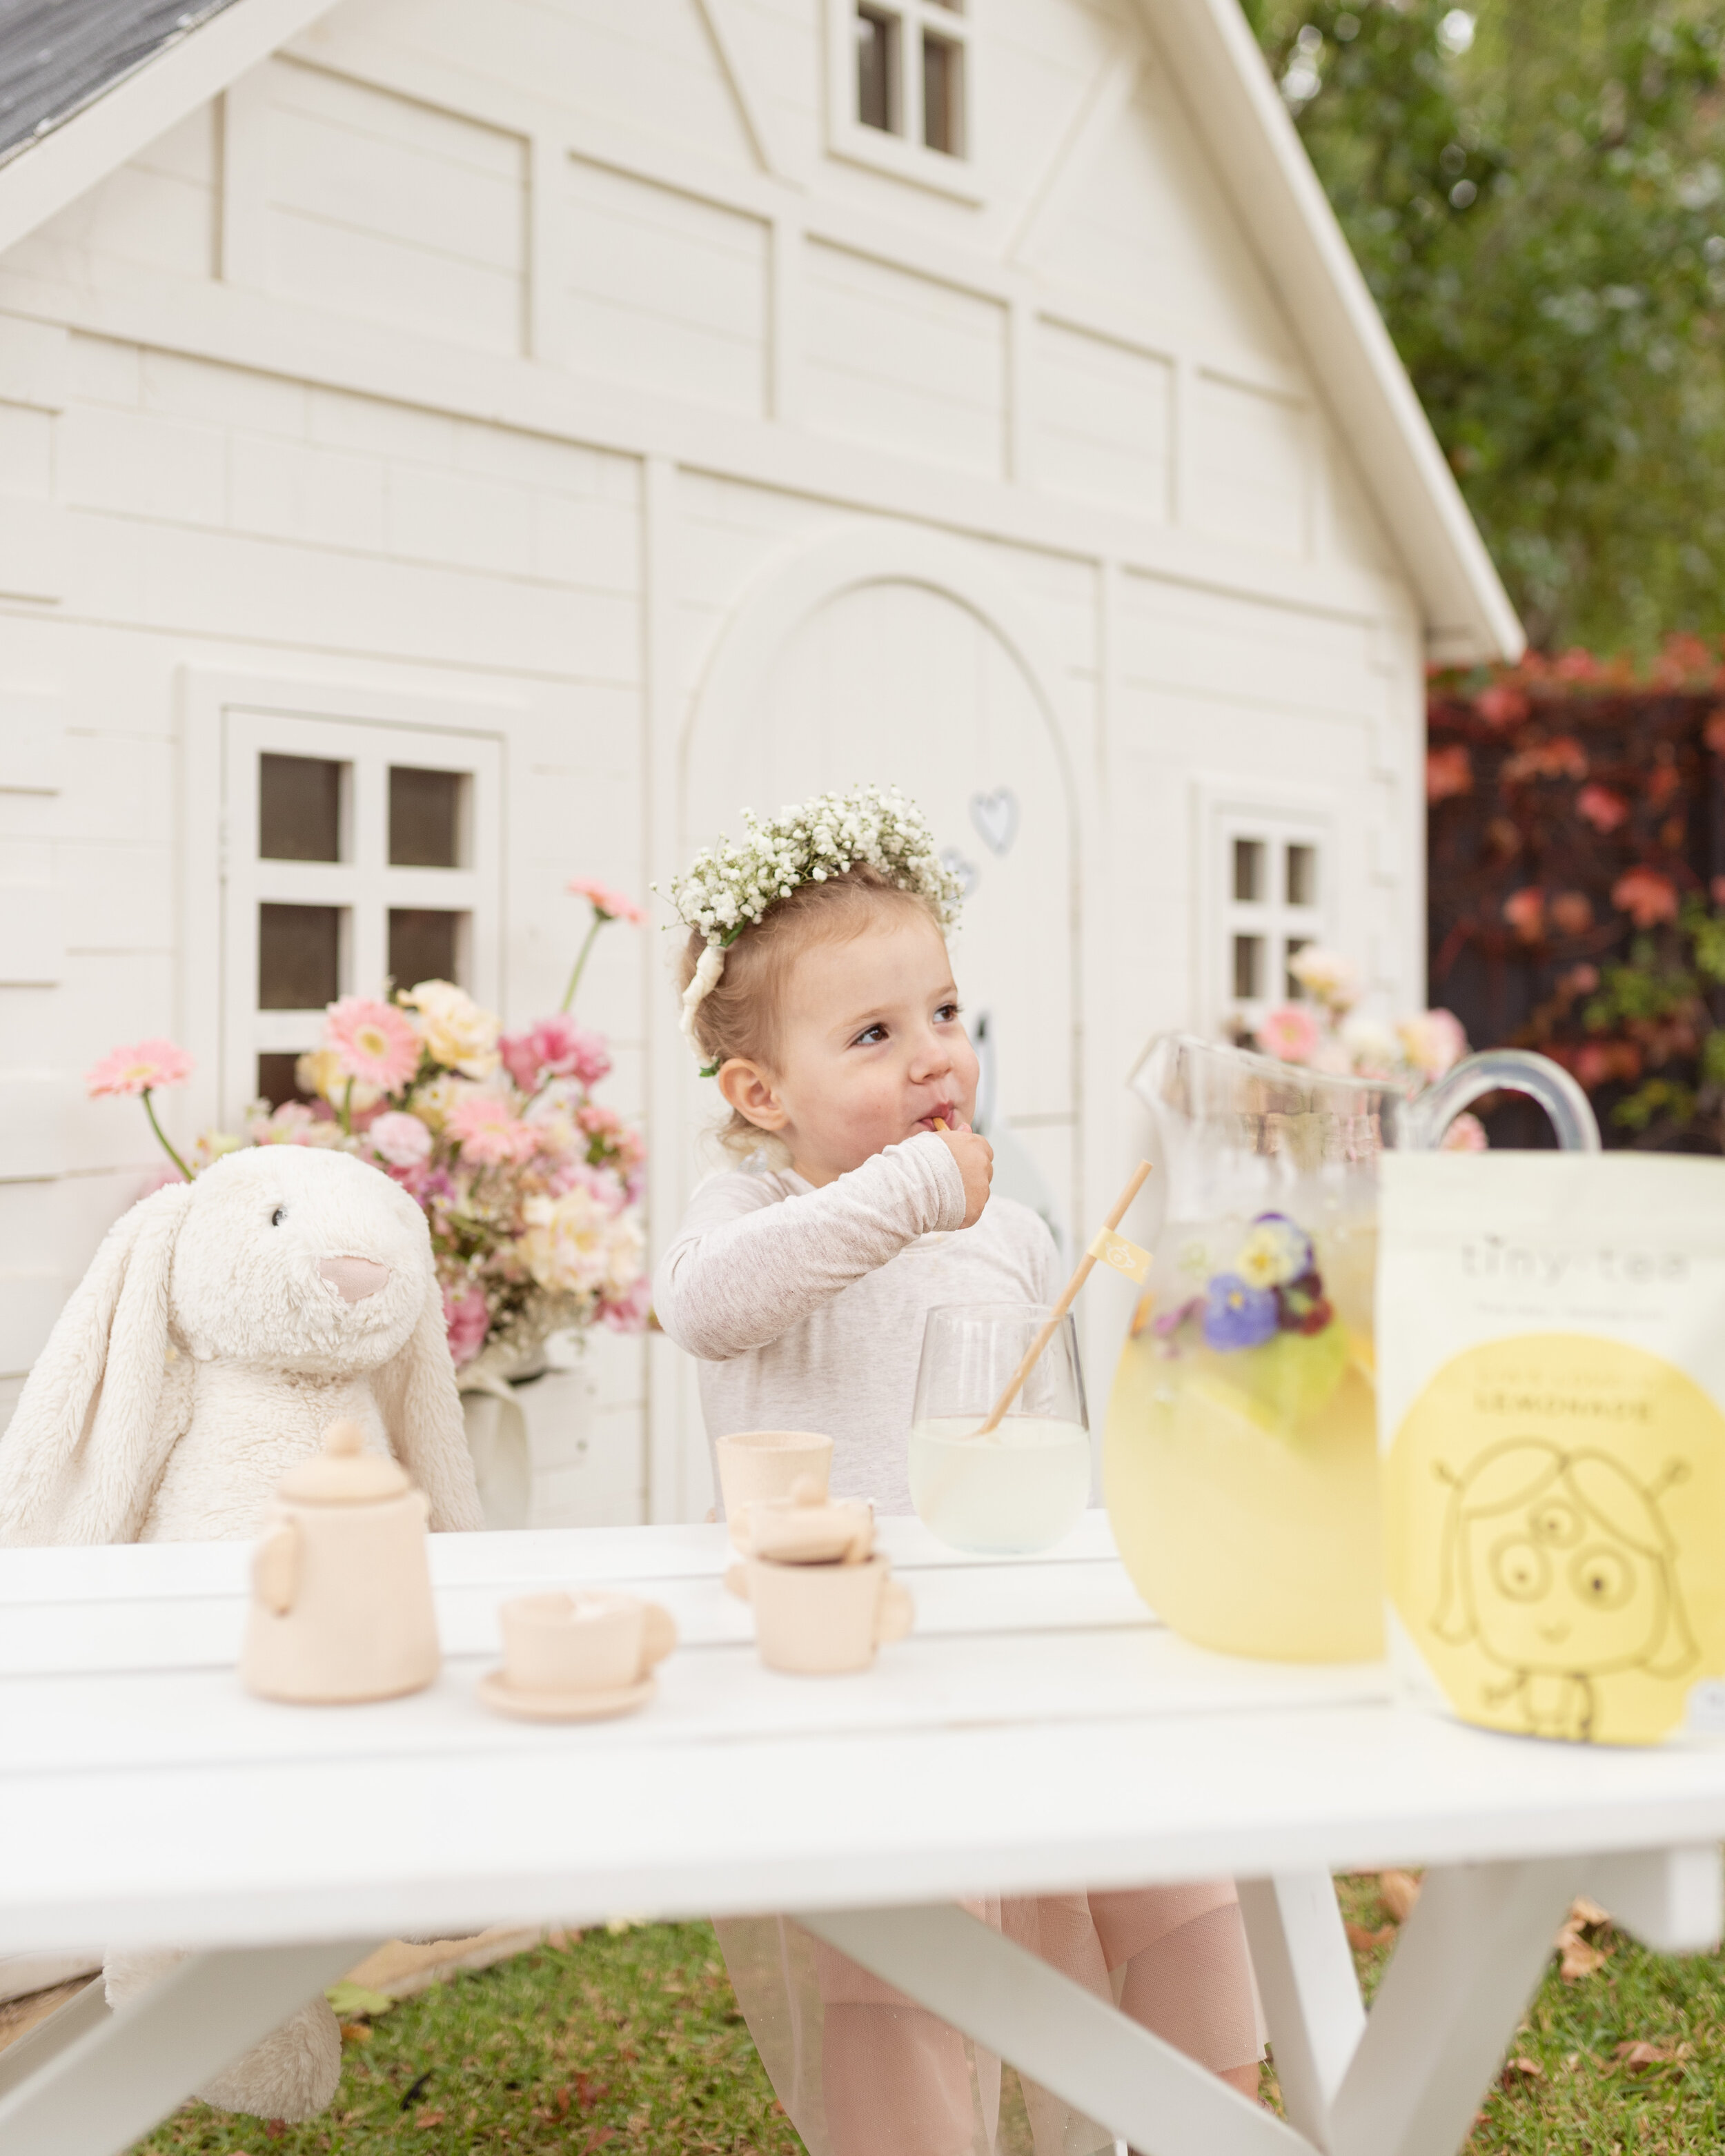 Little Party Play is definitely our favourite supplier for modern kids furniture hire, offering stylish picnic tables, slides, ball pits and toys.